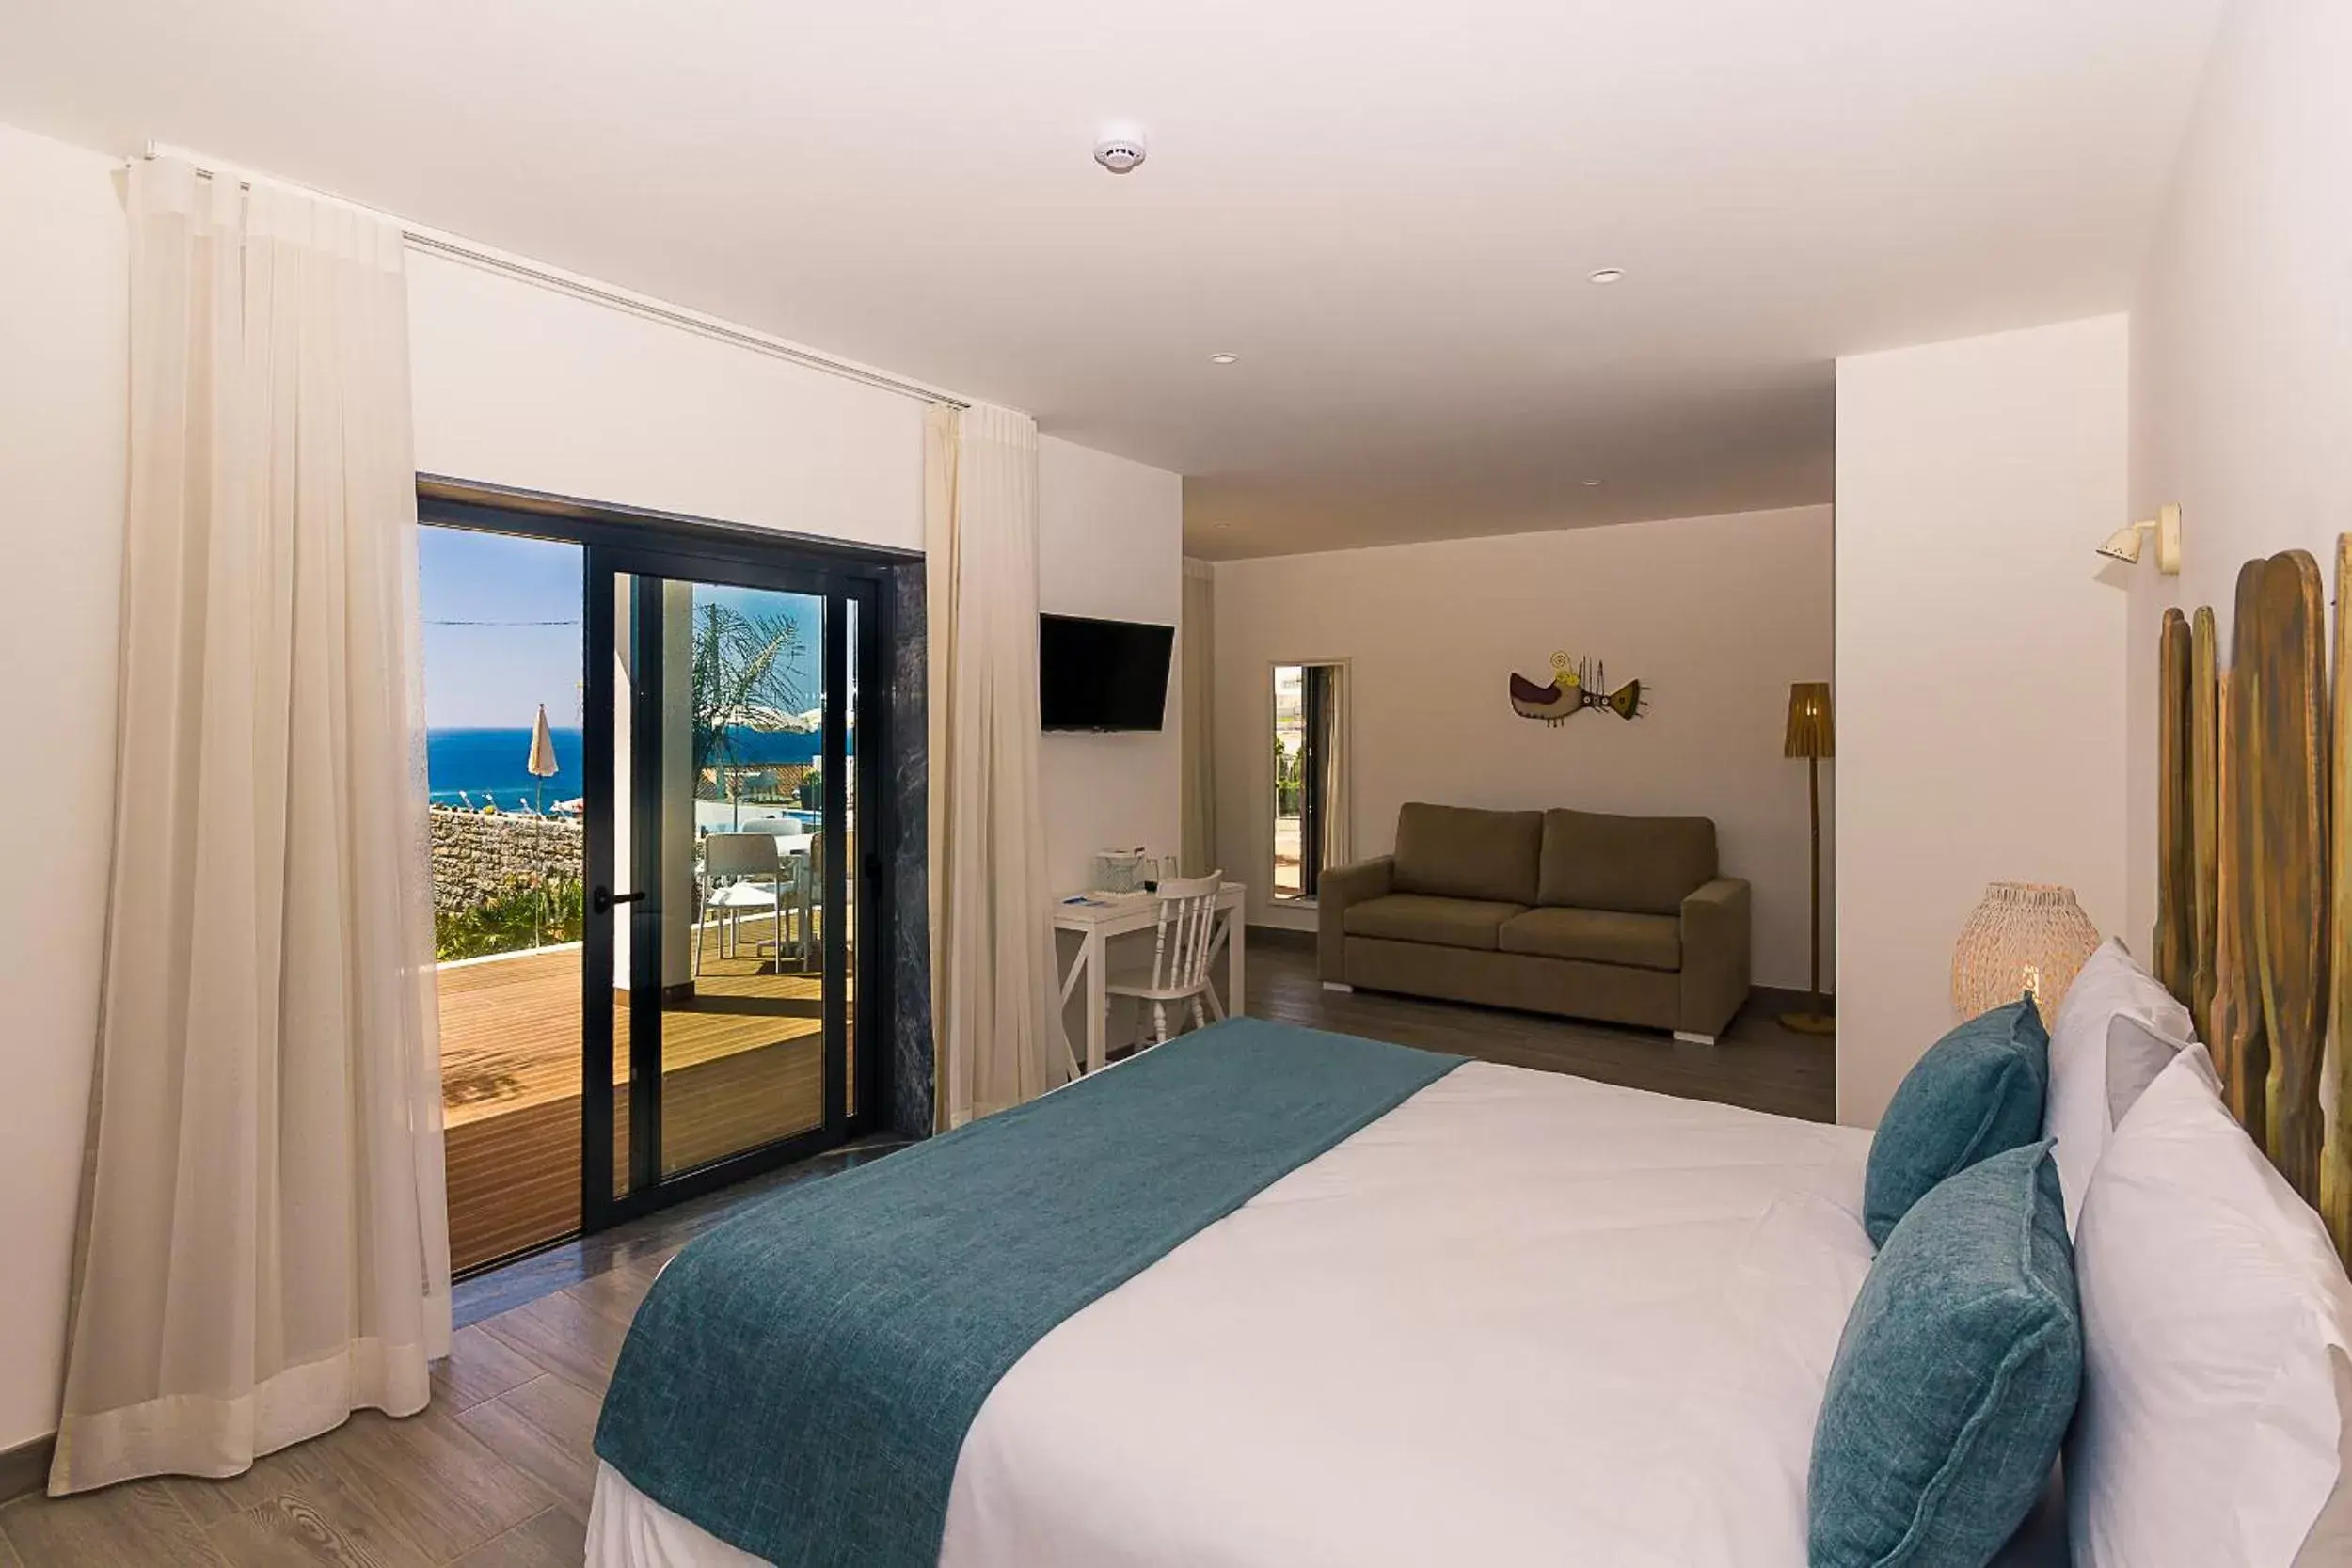 Bed, Room Photo in Mareta Beach House - Boutique Residence